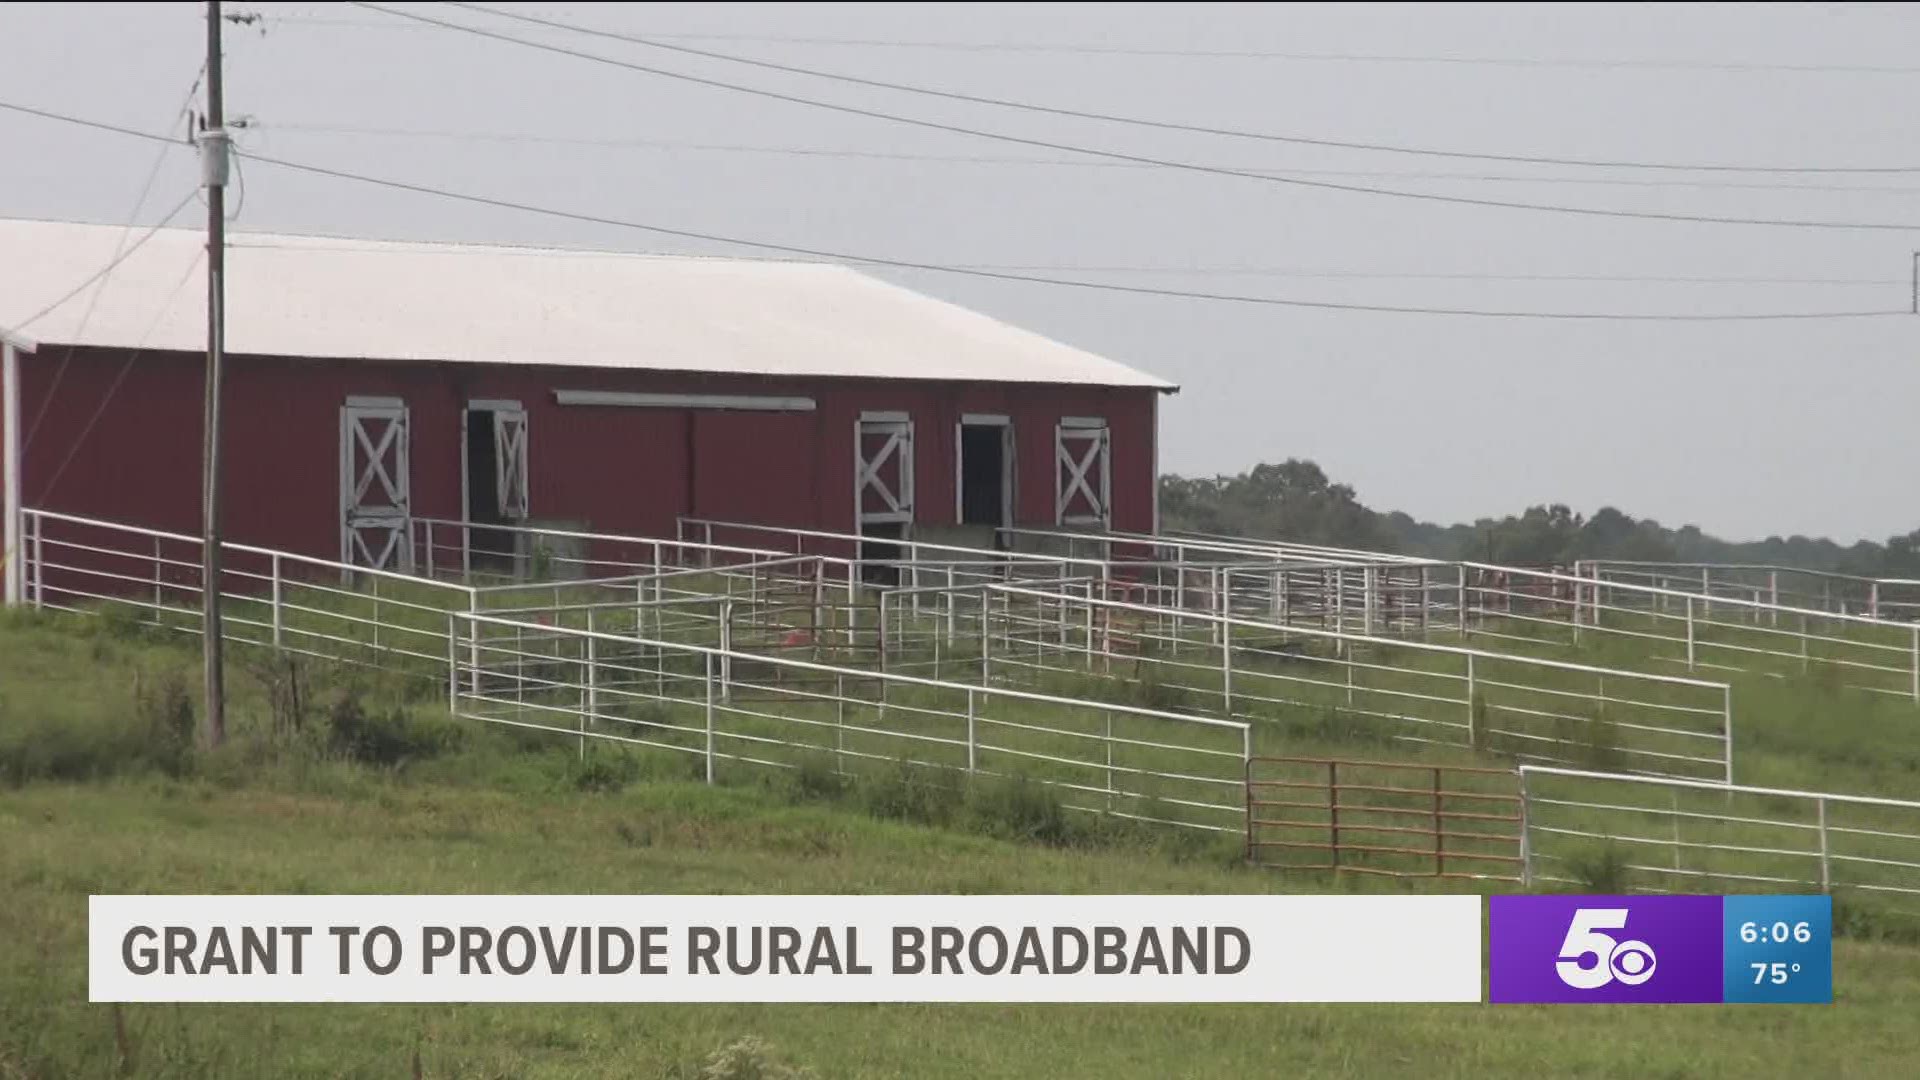 Since the coronavirus pandemic began, many rural school districts in our area have been worried about the lack of high-speed internet access for students.